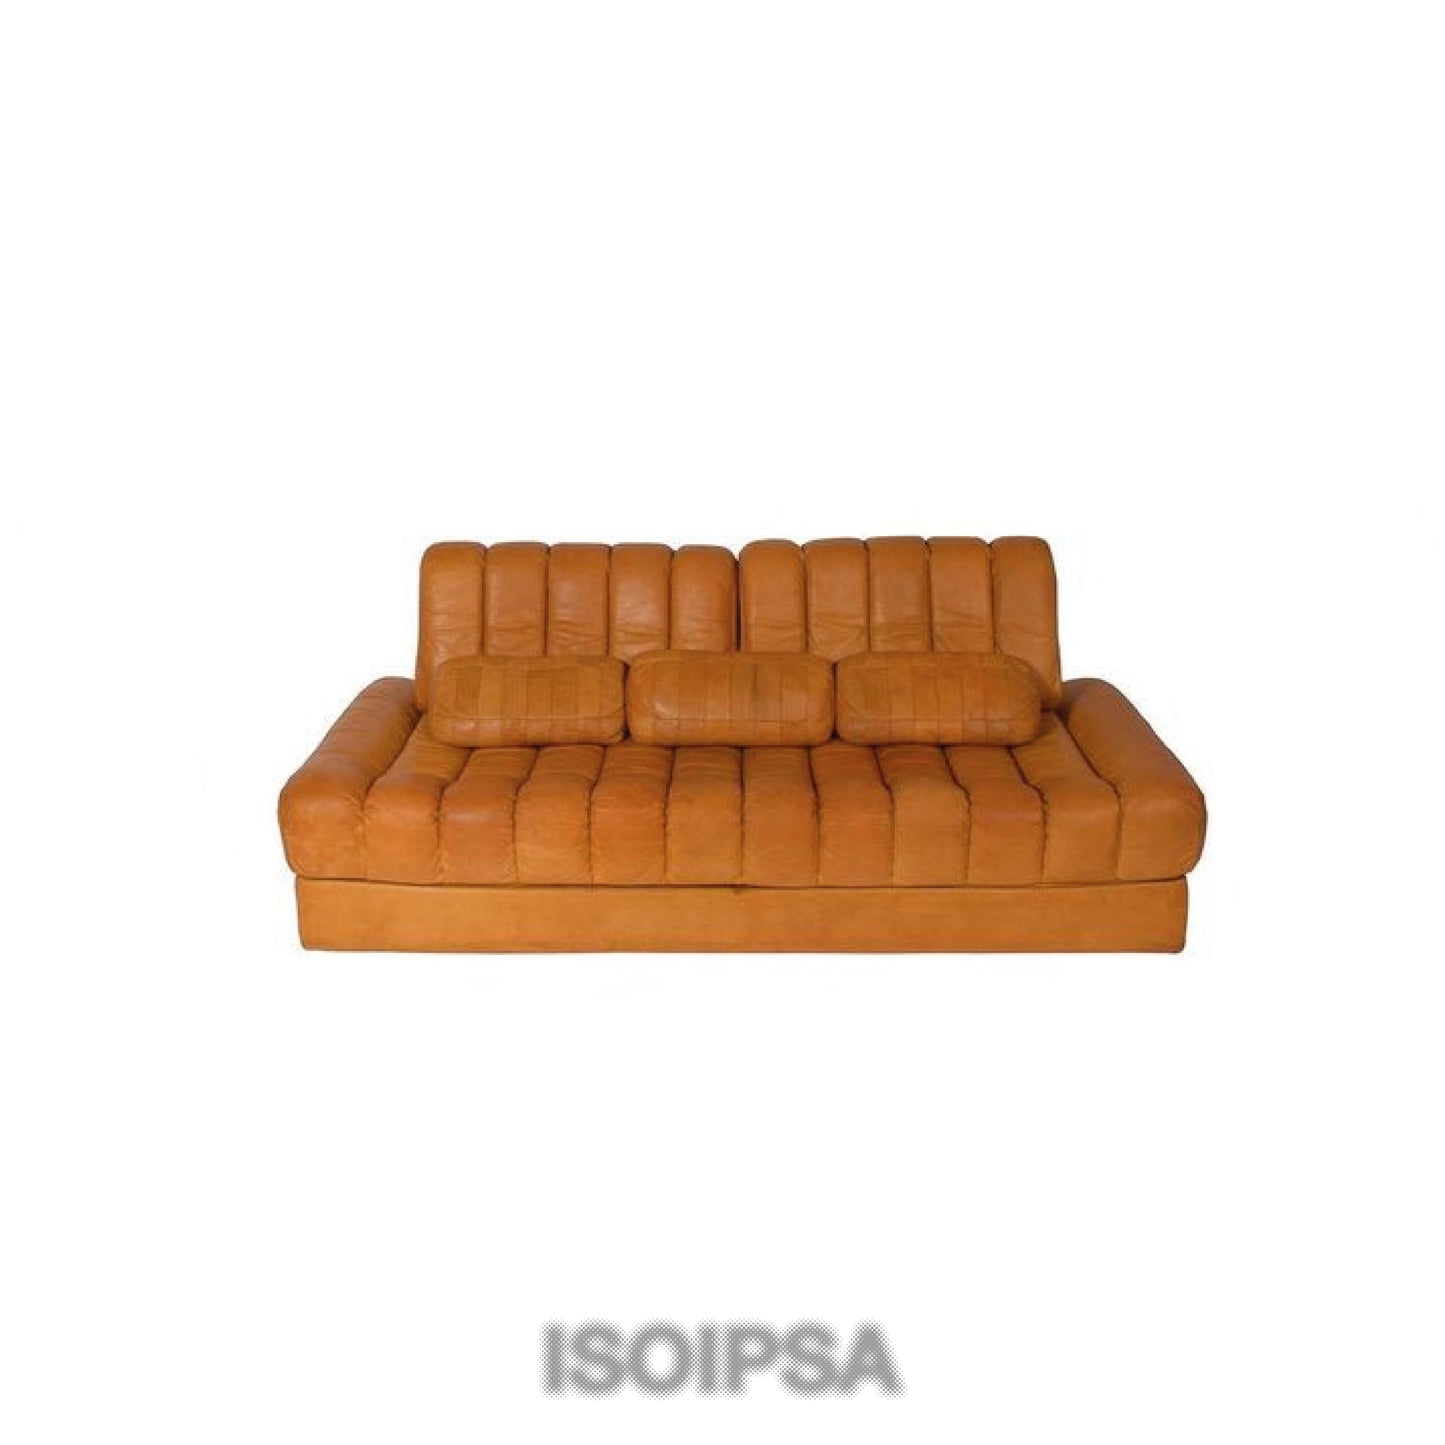 DS 85 Sofa / Daybed / Bed